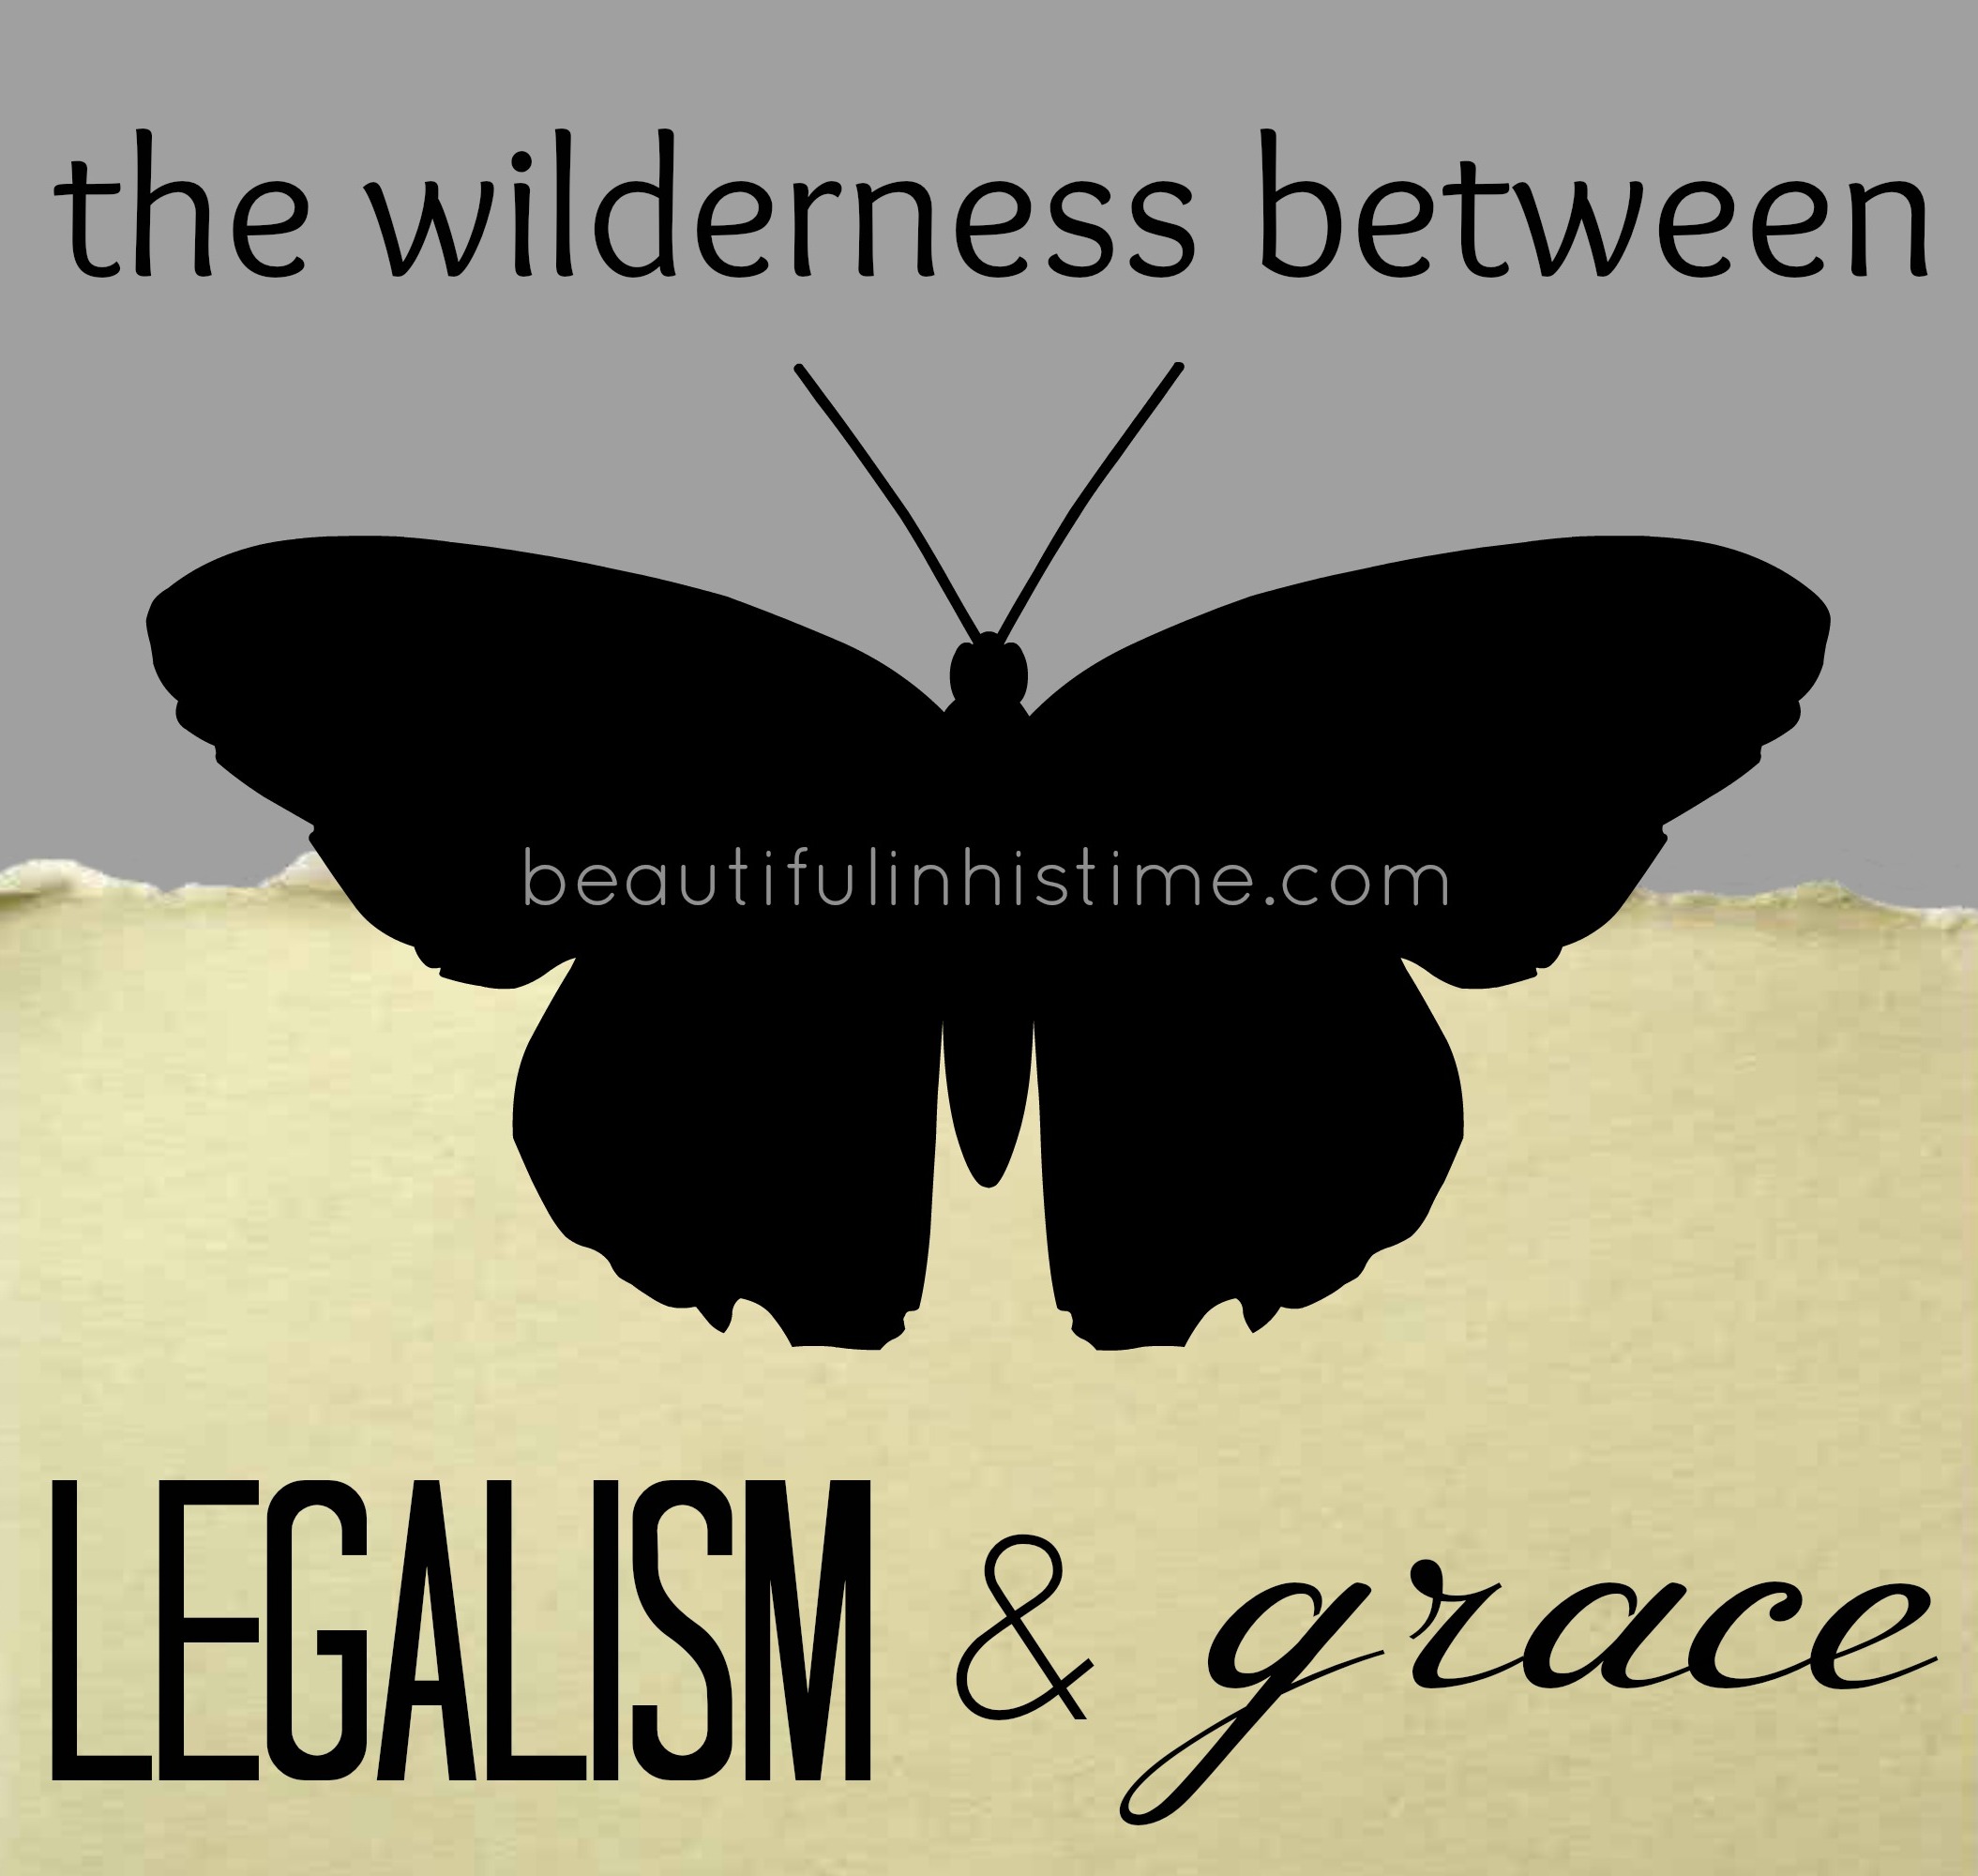 the wilderness between #legalism and #grace (a blog series)